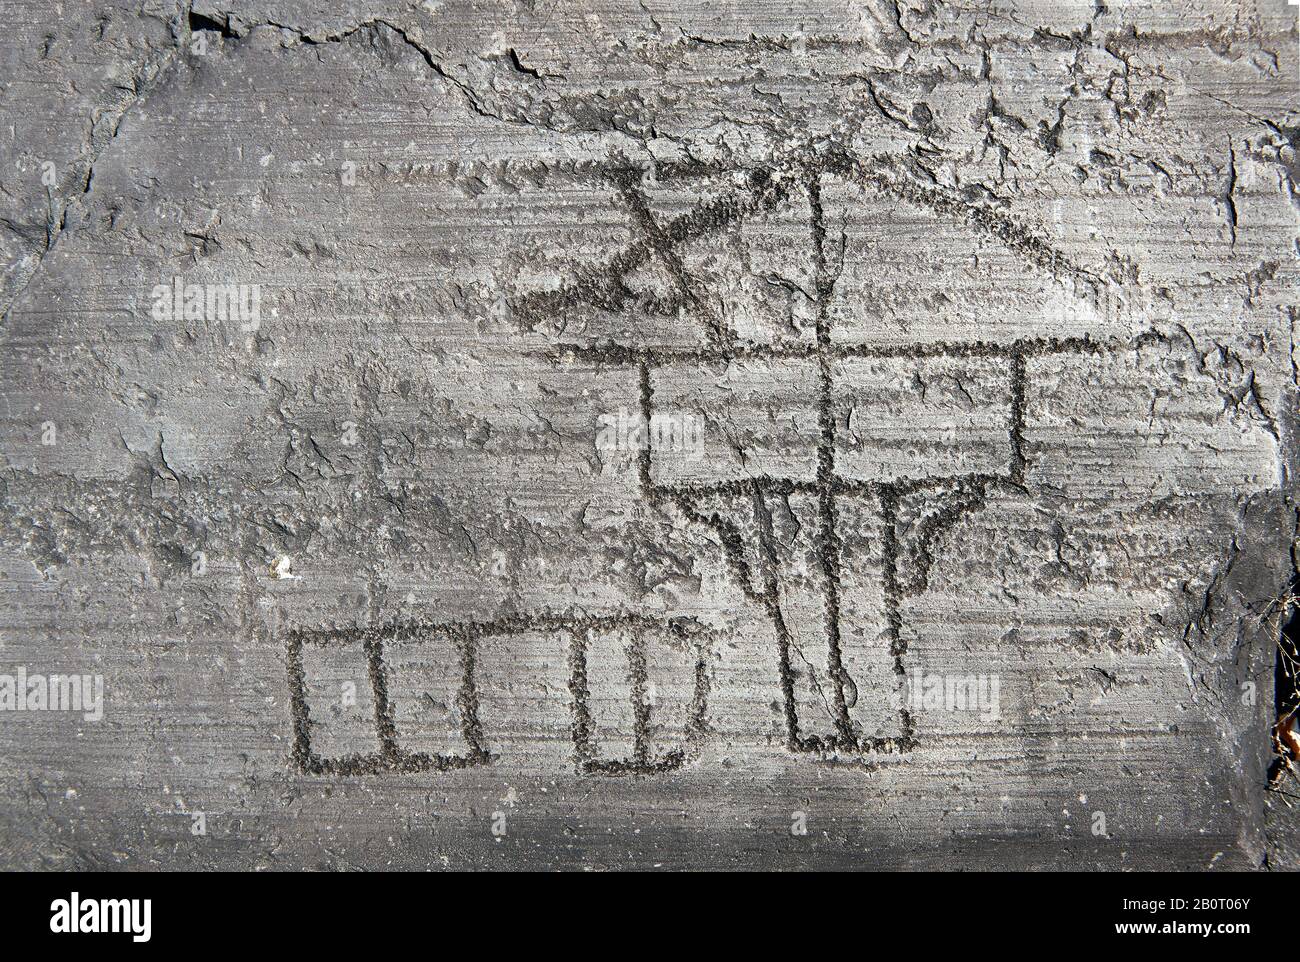 Petroglyph, rock carving, of a house on stilts. Carved by the ancient Camunni people in the iron age between 1000-1200 BC. Rock no 24, Foppi di Nadro, Stock Photo